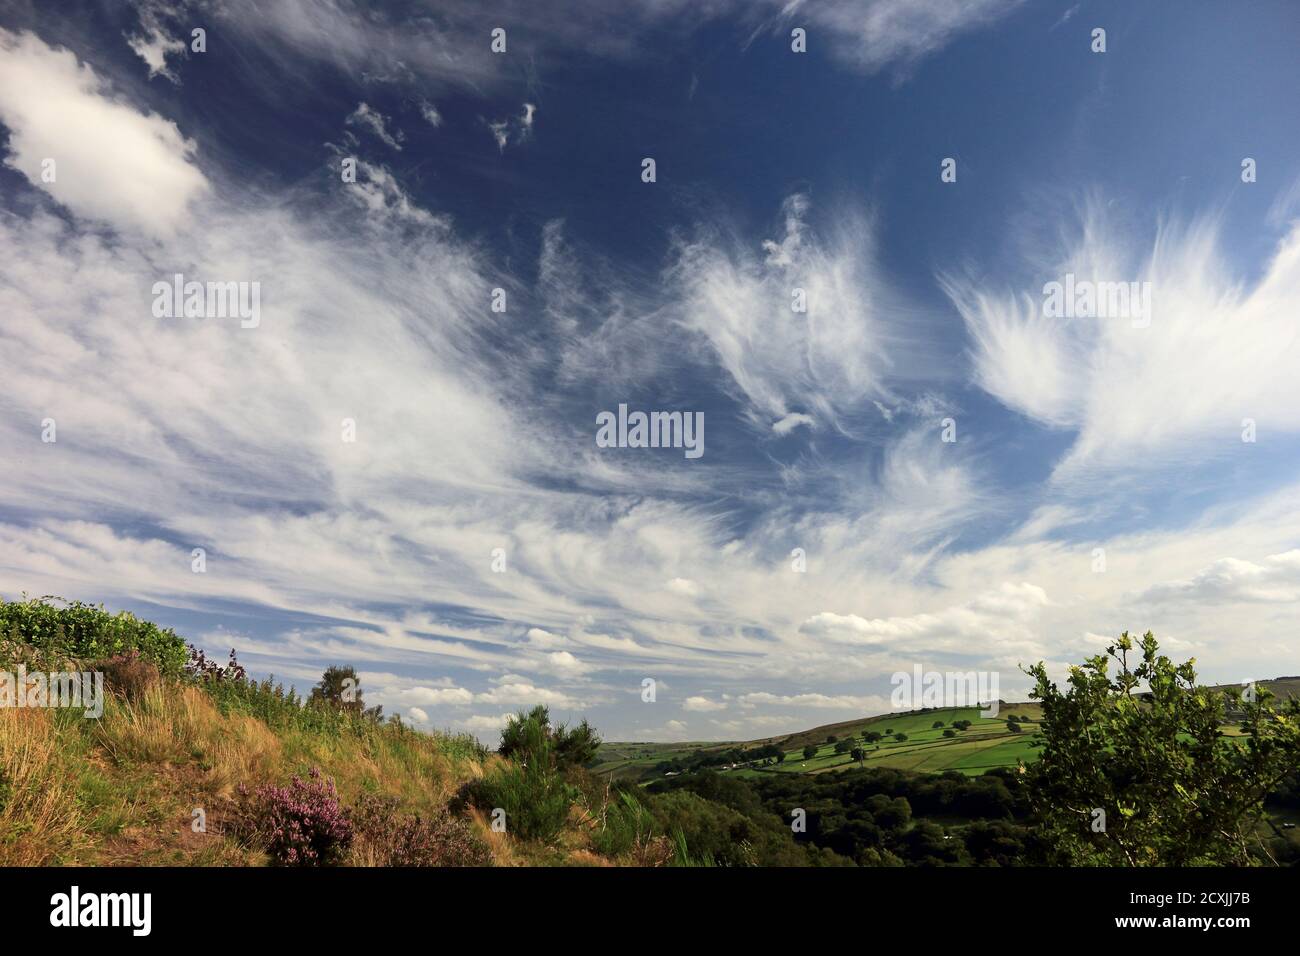 Clouds in blue sky over pennine hills Stock Photo